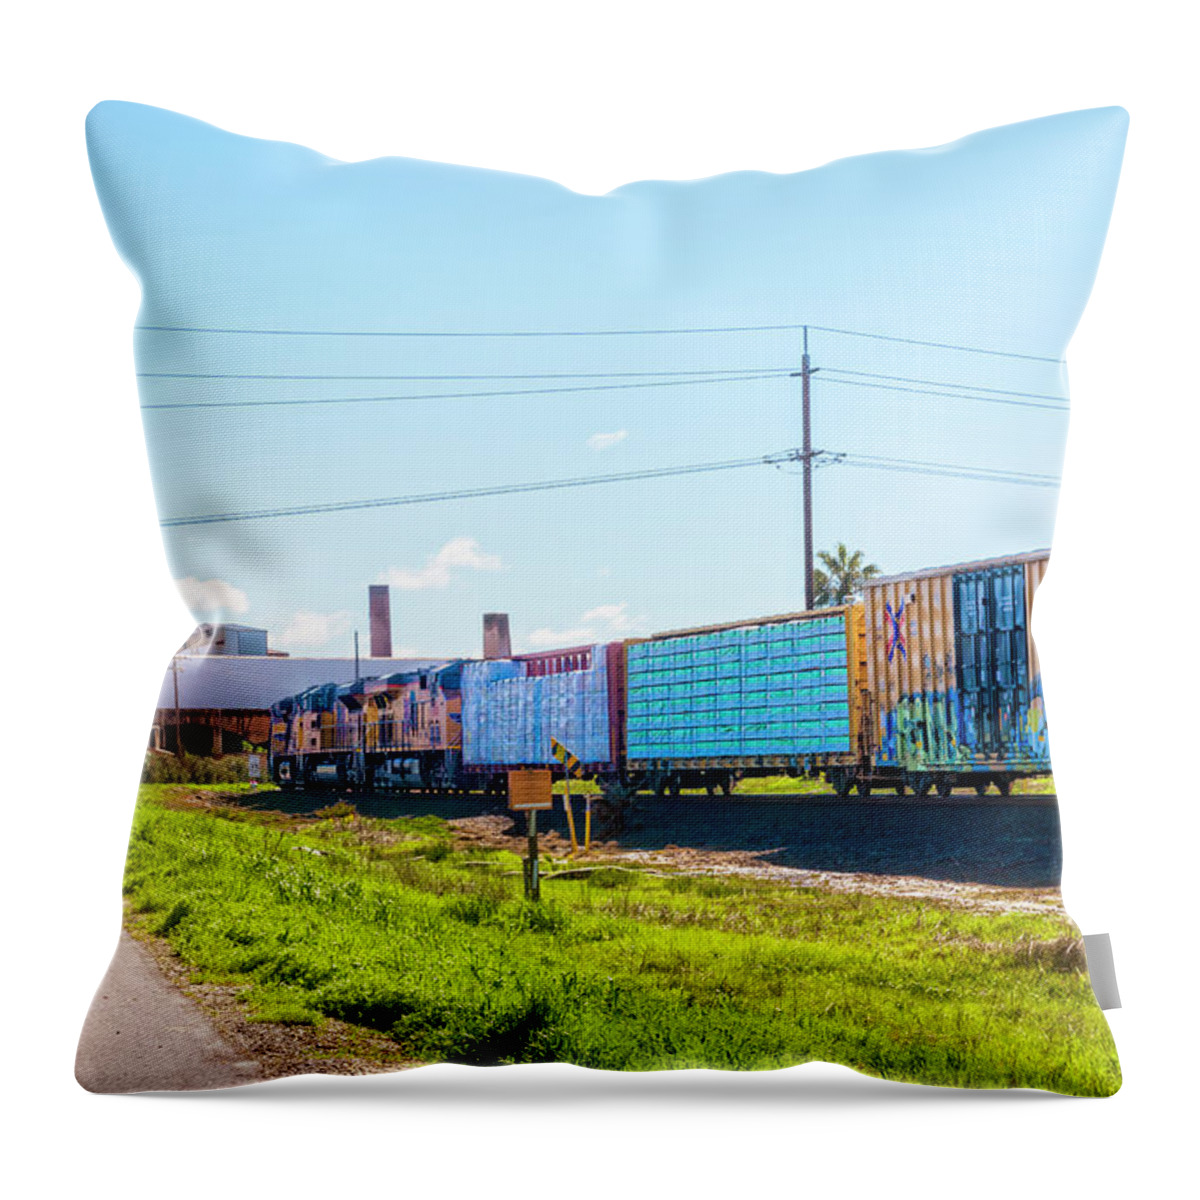 Freight Trains Throw Pillow featuring the photograph Up8145 by Jim Thompson